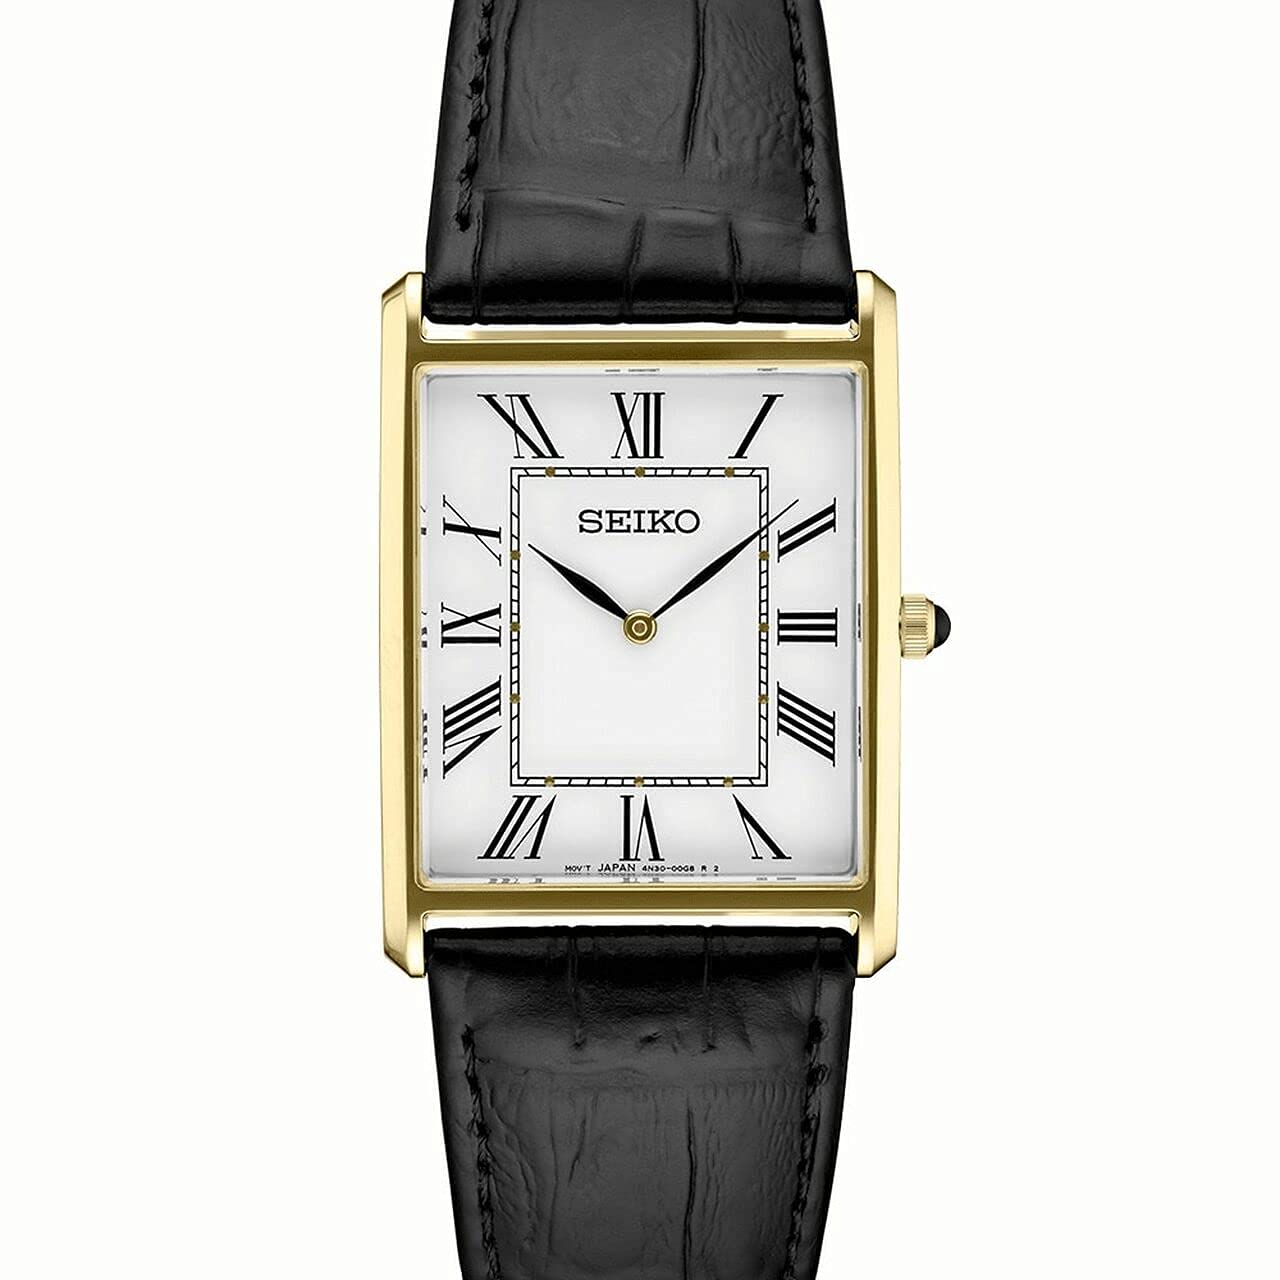 SEIKO SWR052 Watch for Men - Essentials Collection - Water Resistant with Gold-Tone Stainless Steel Rectangular Case, White Dial with Roman Numerals, and Black Leather Strap